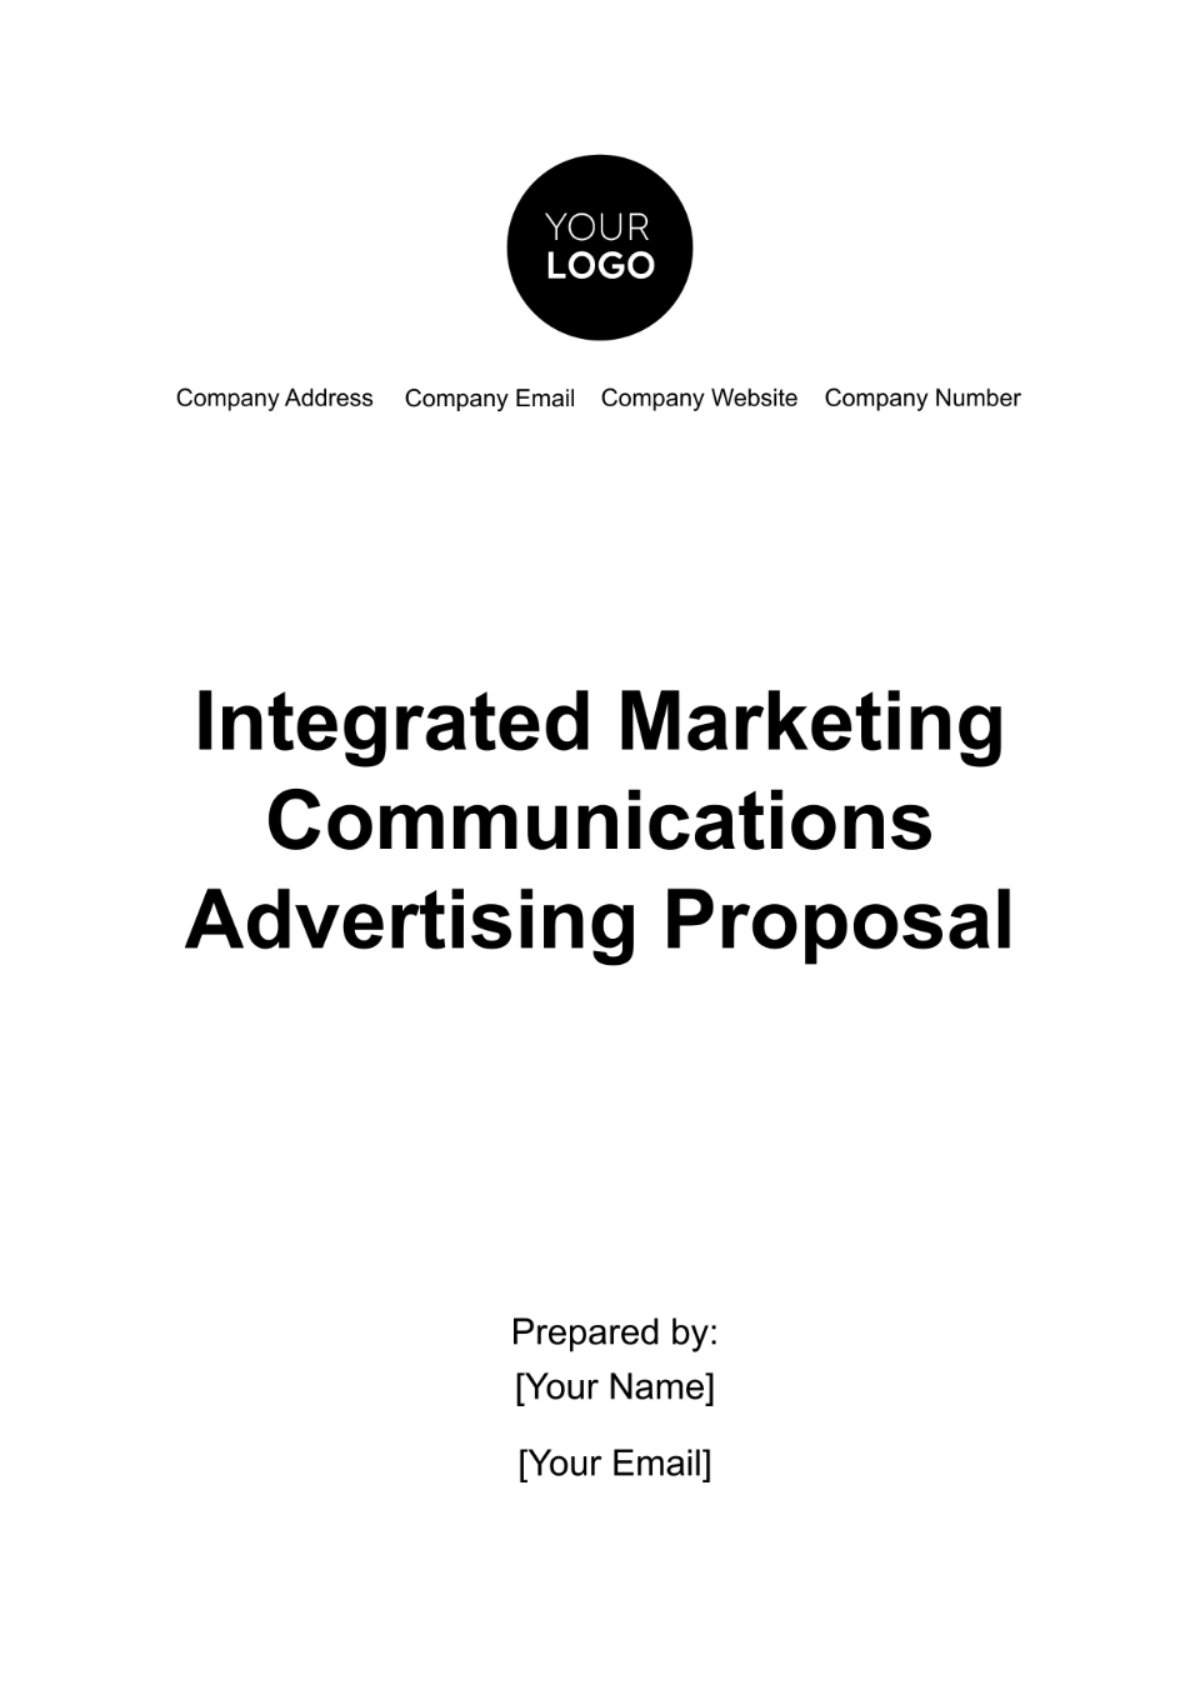 Free Integrated Marketing Communications Advertising Proposal Template